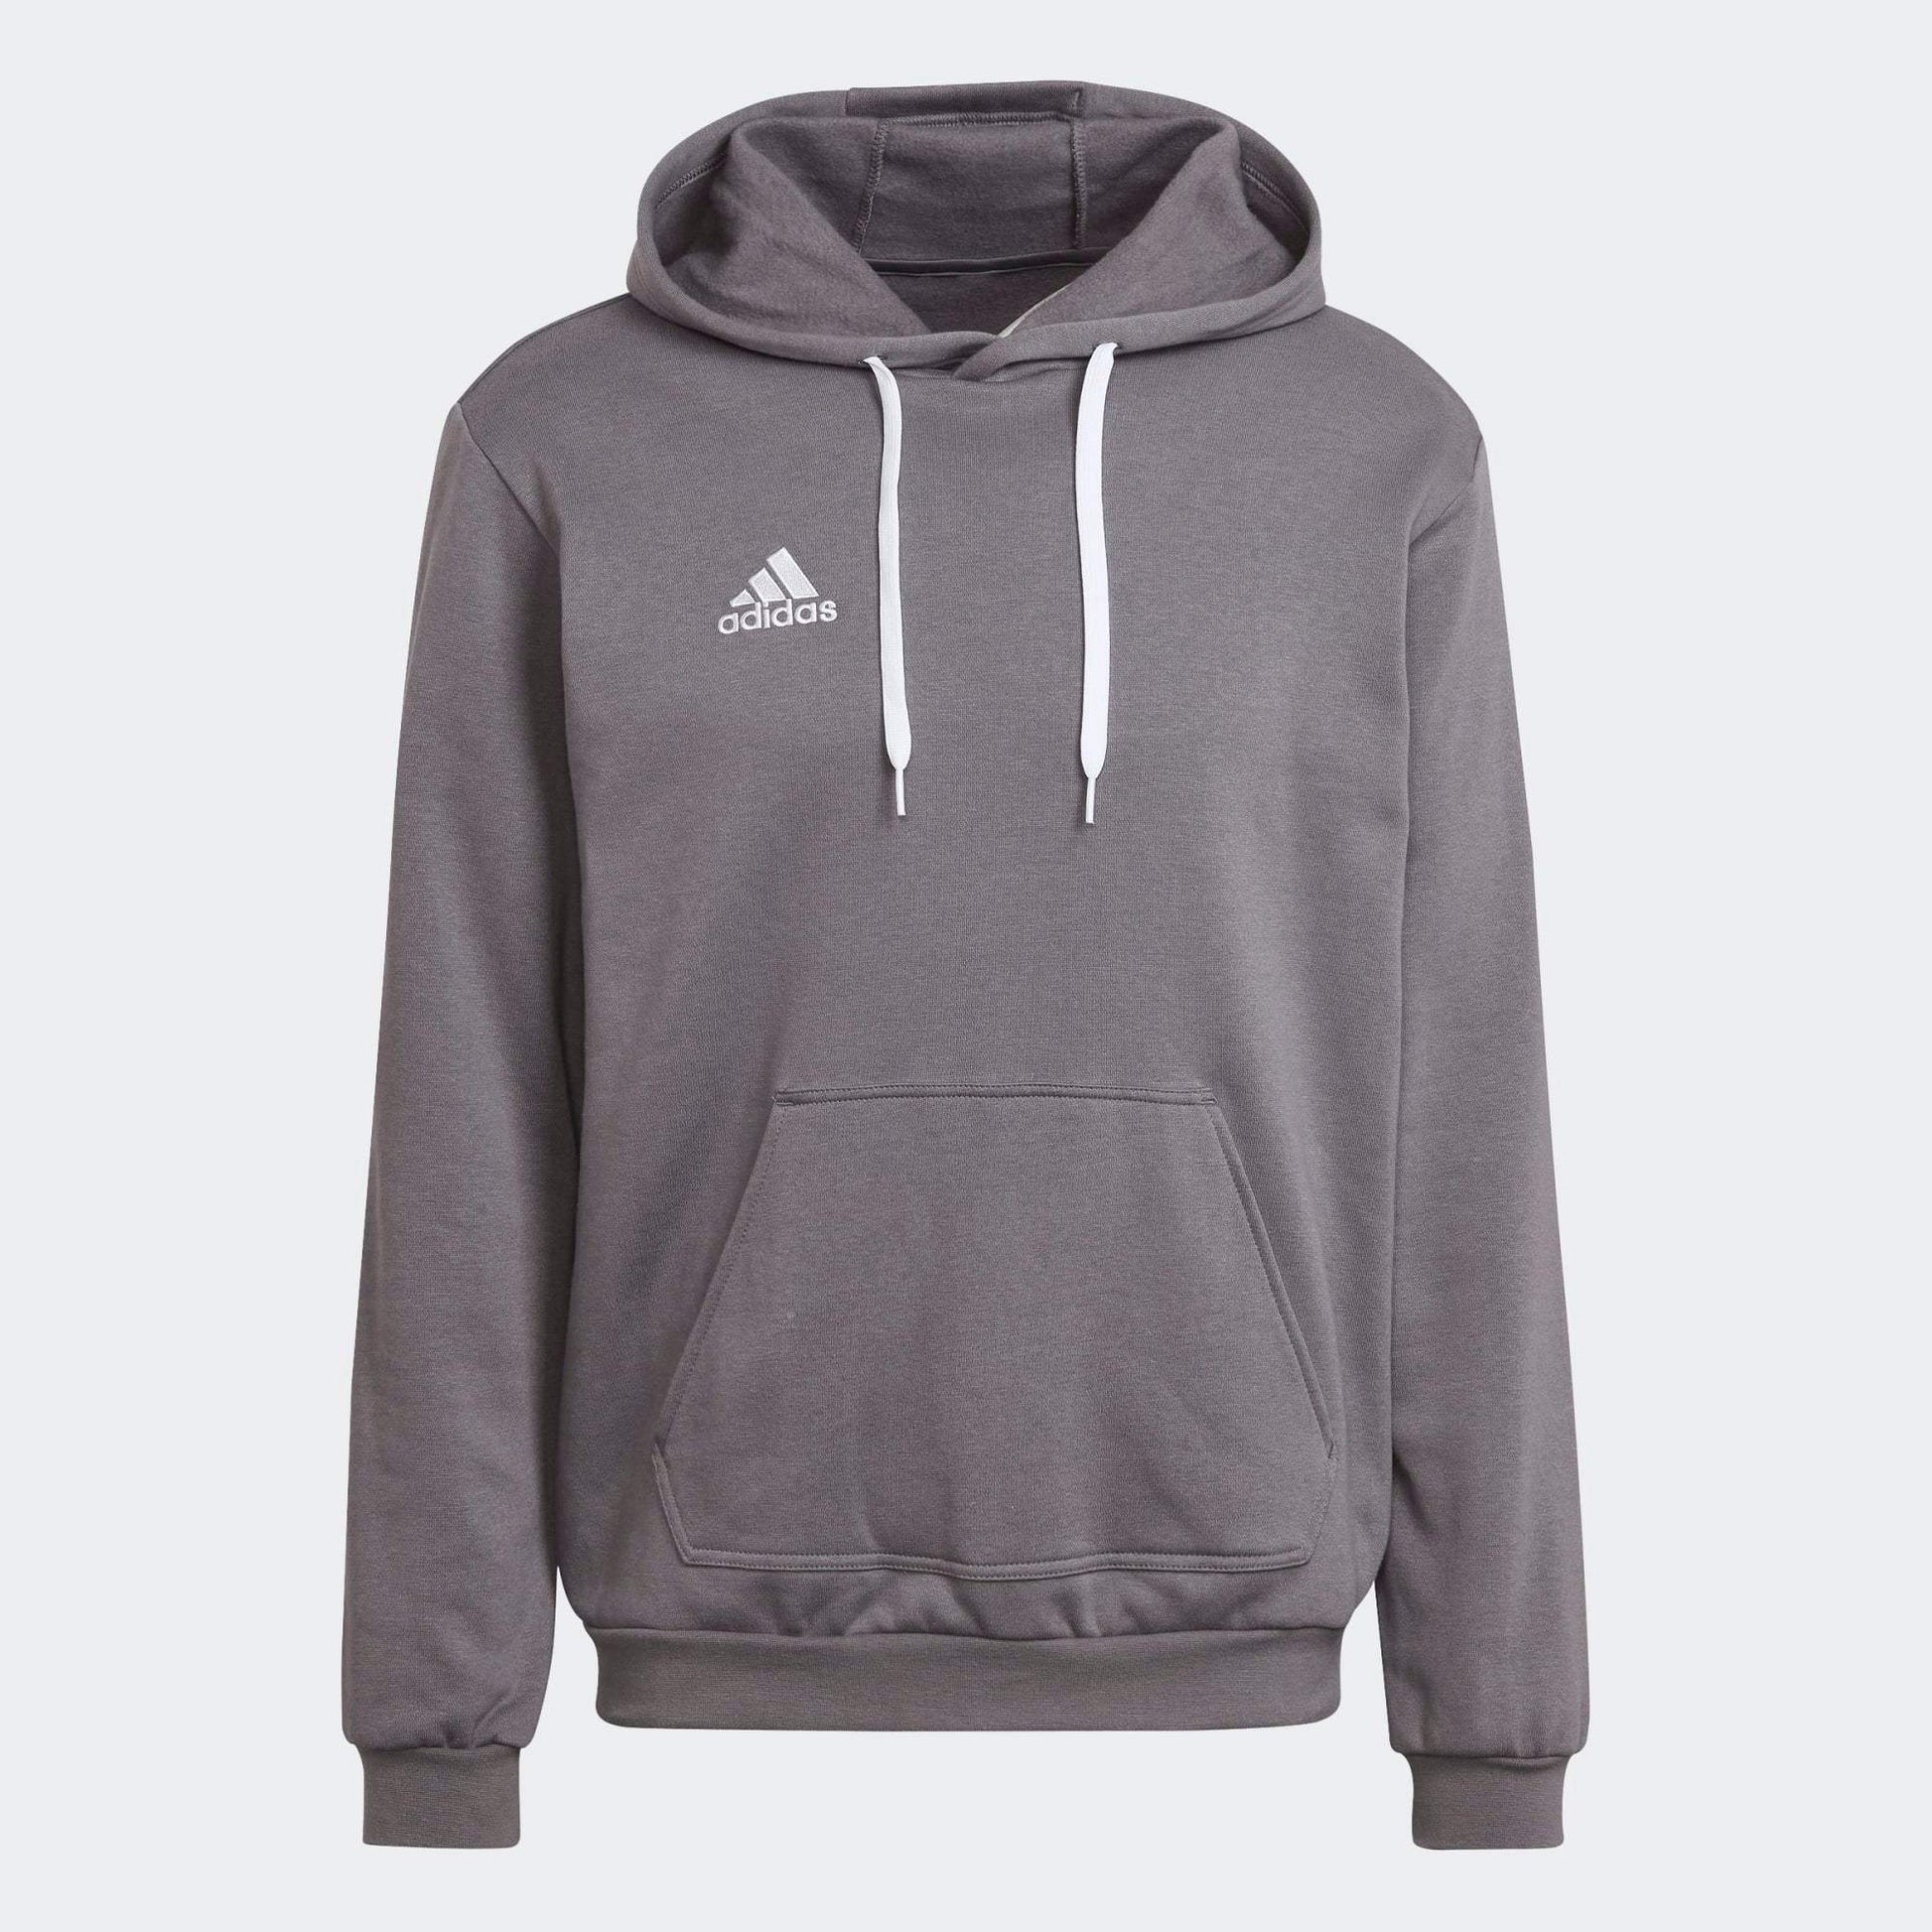 Entrada 22 Pullover Hoodie by Adidas - The Luxury Promotional Gifts Company Limited